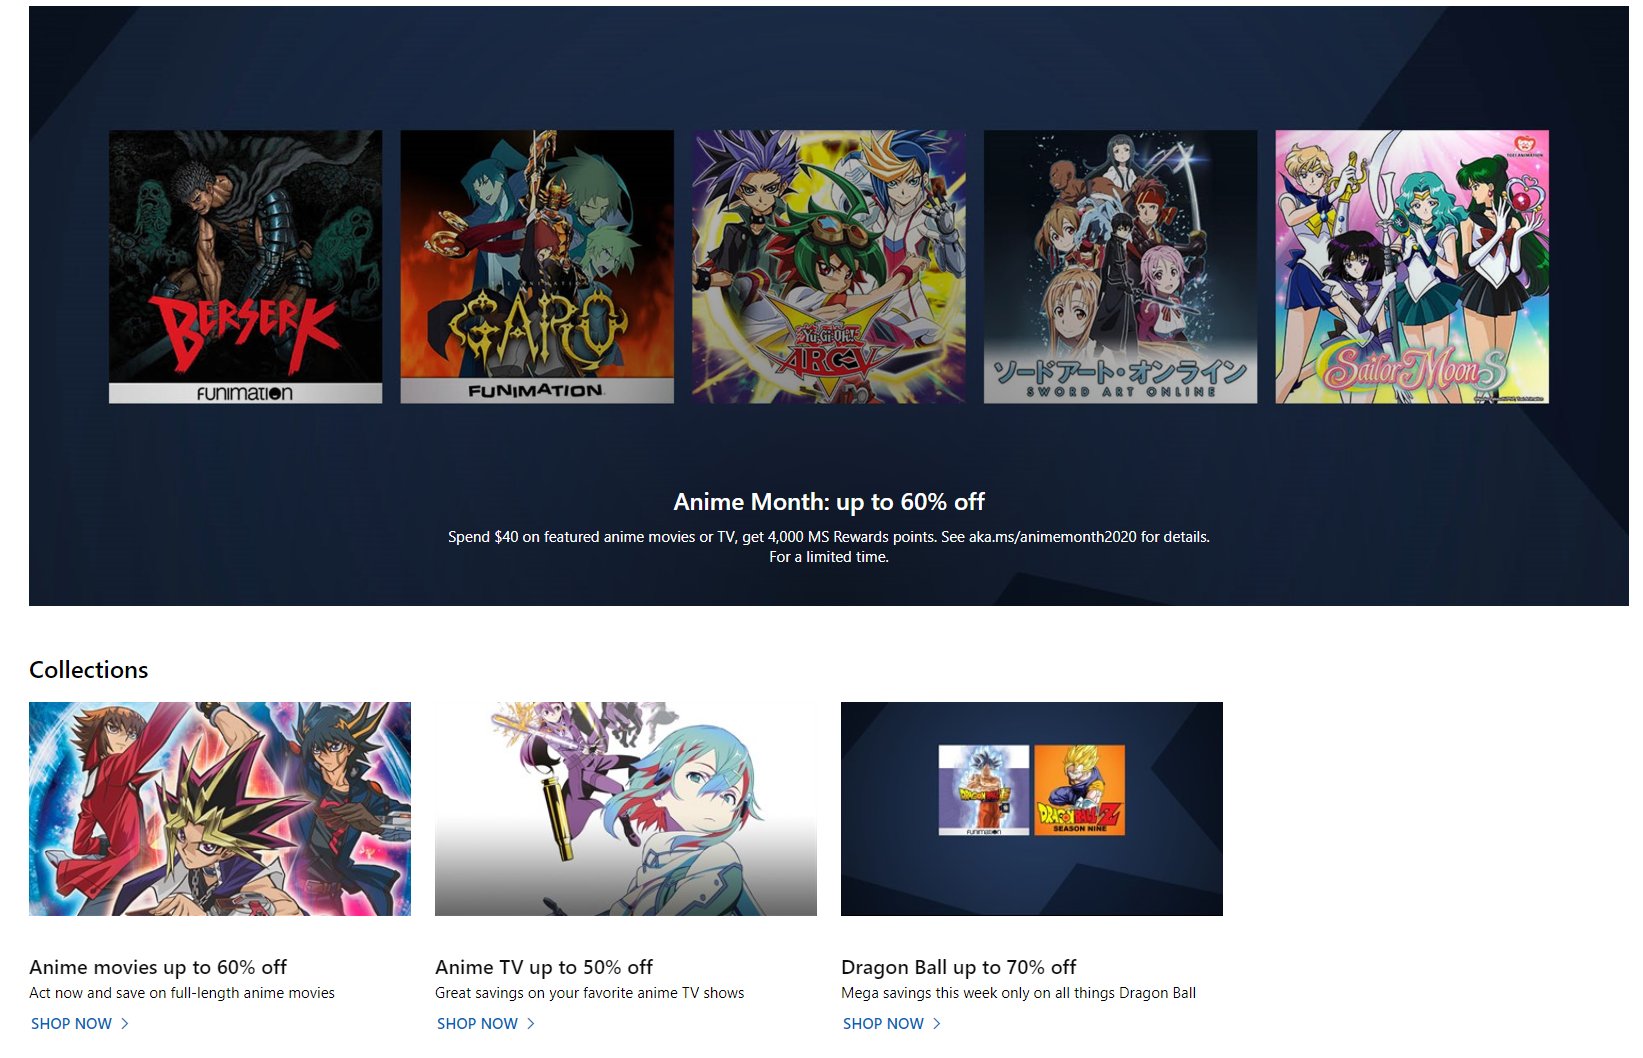 Wario64 Anime Movies Tv Sale On Ms Store Spend 40 Get 4 000 Ms Rewards Points T Co Yz0lsie1jd